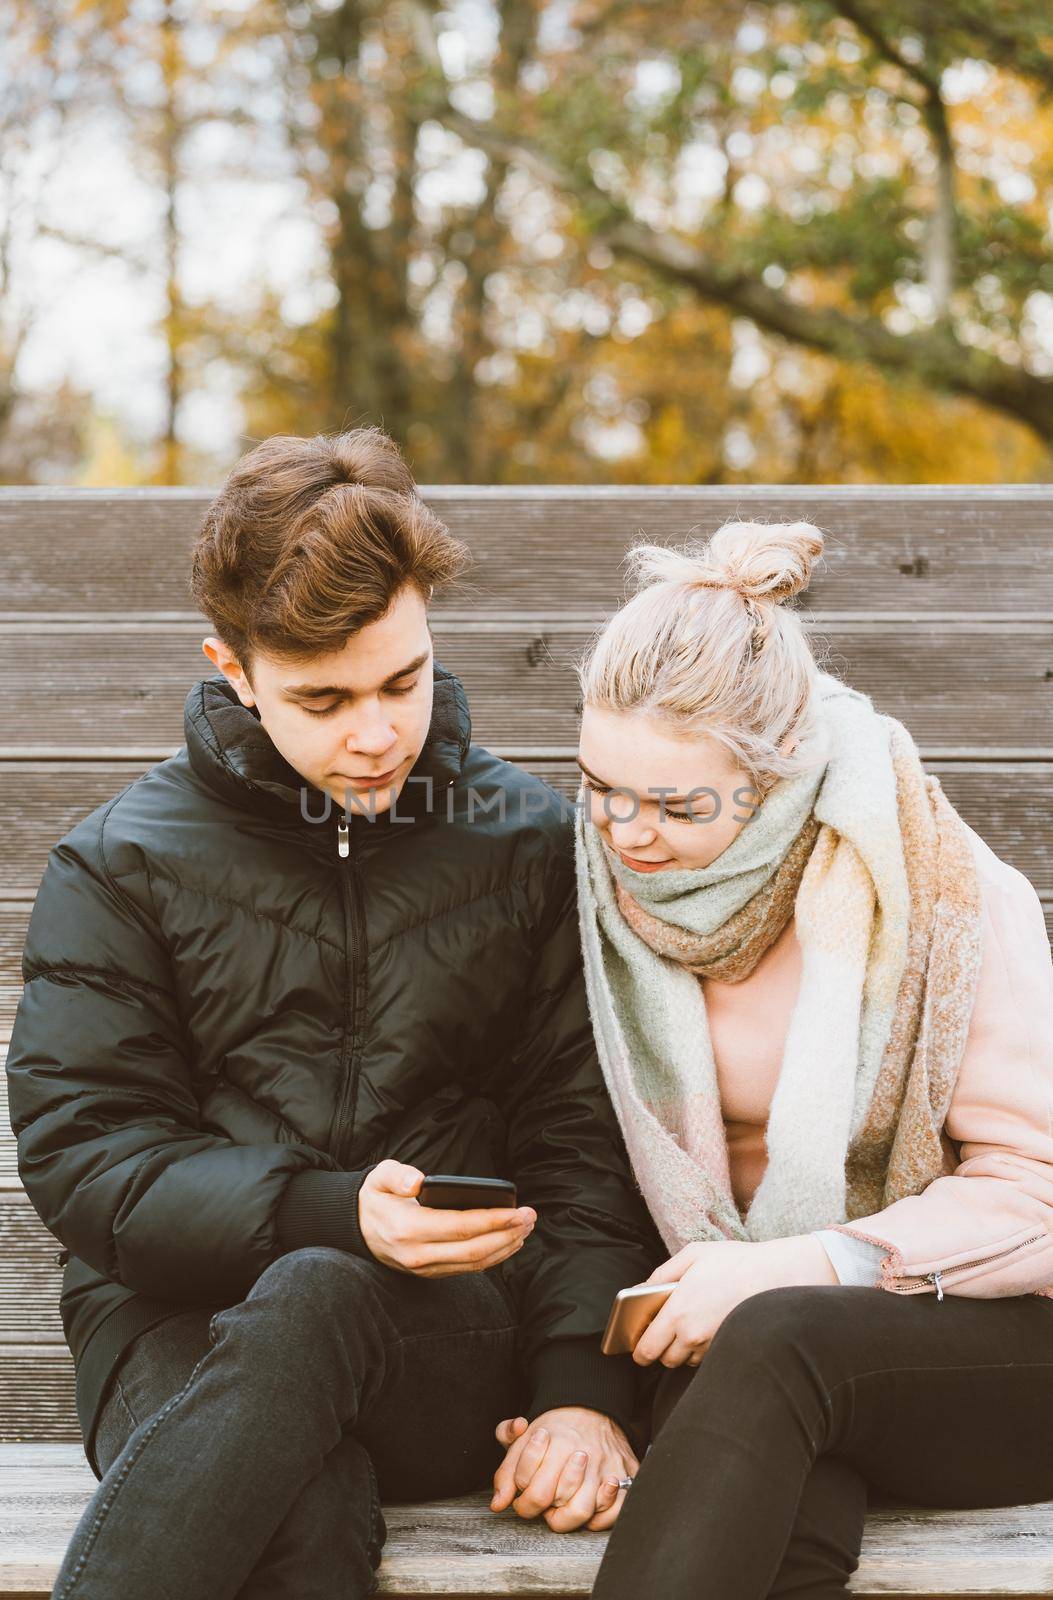 Loving teenagers on date look at mobile phones, guy shows the girl something interesting on the phone. Immersion in virtual world, social networks. Concept of teen love, Smombie dating, vertical